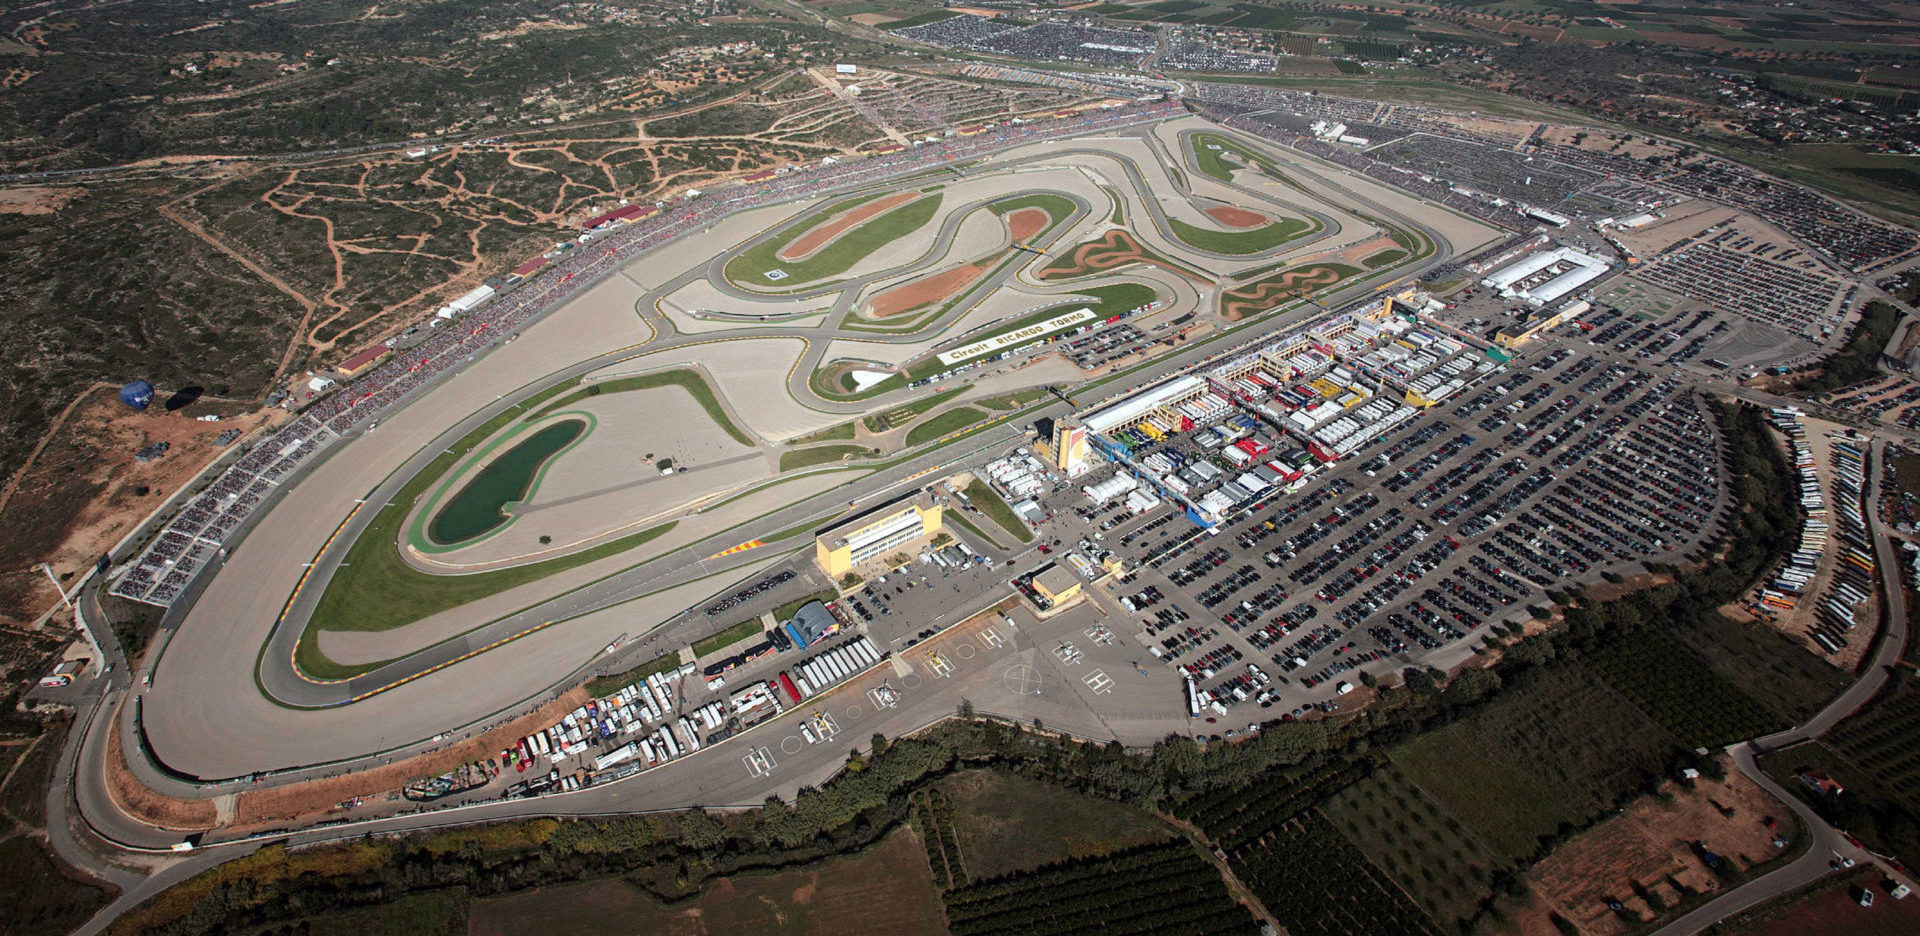 MotoGP World Championship Race Results From Valencia